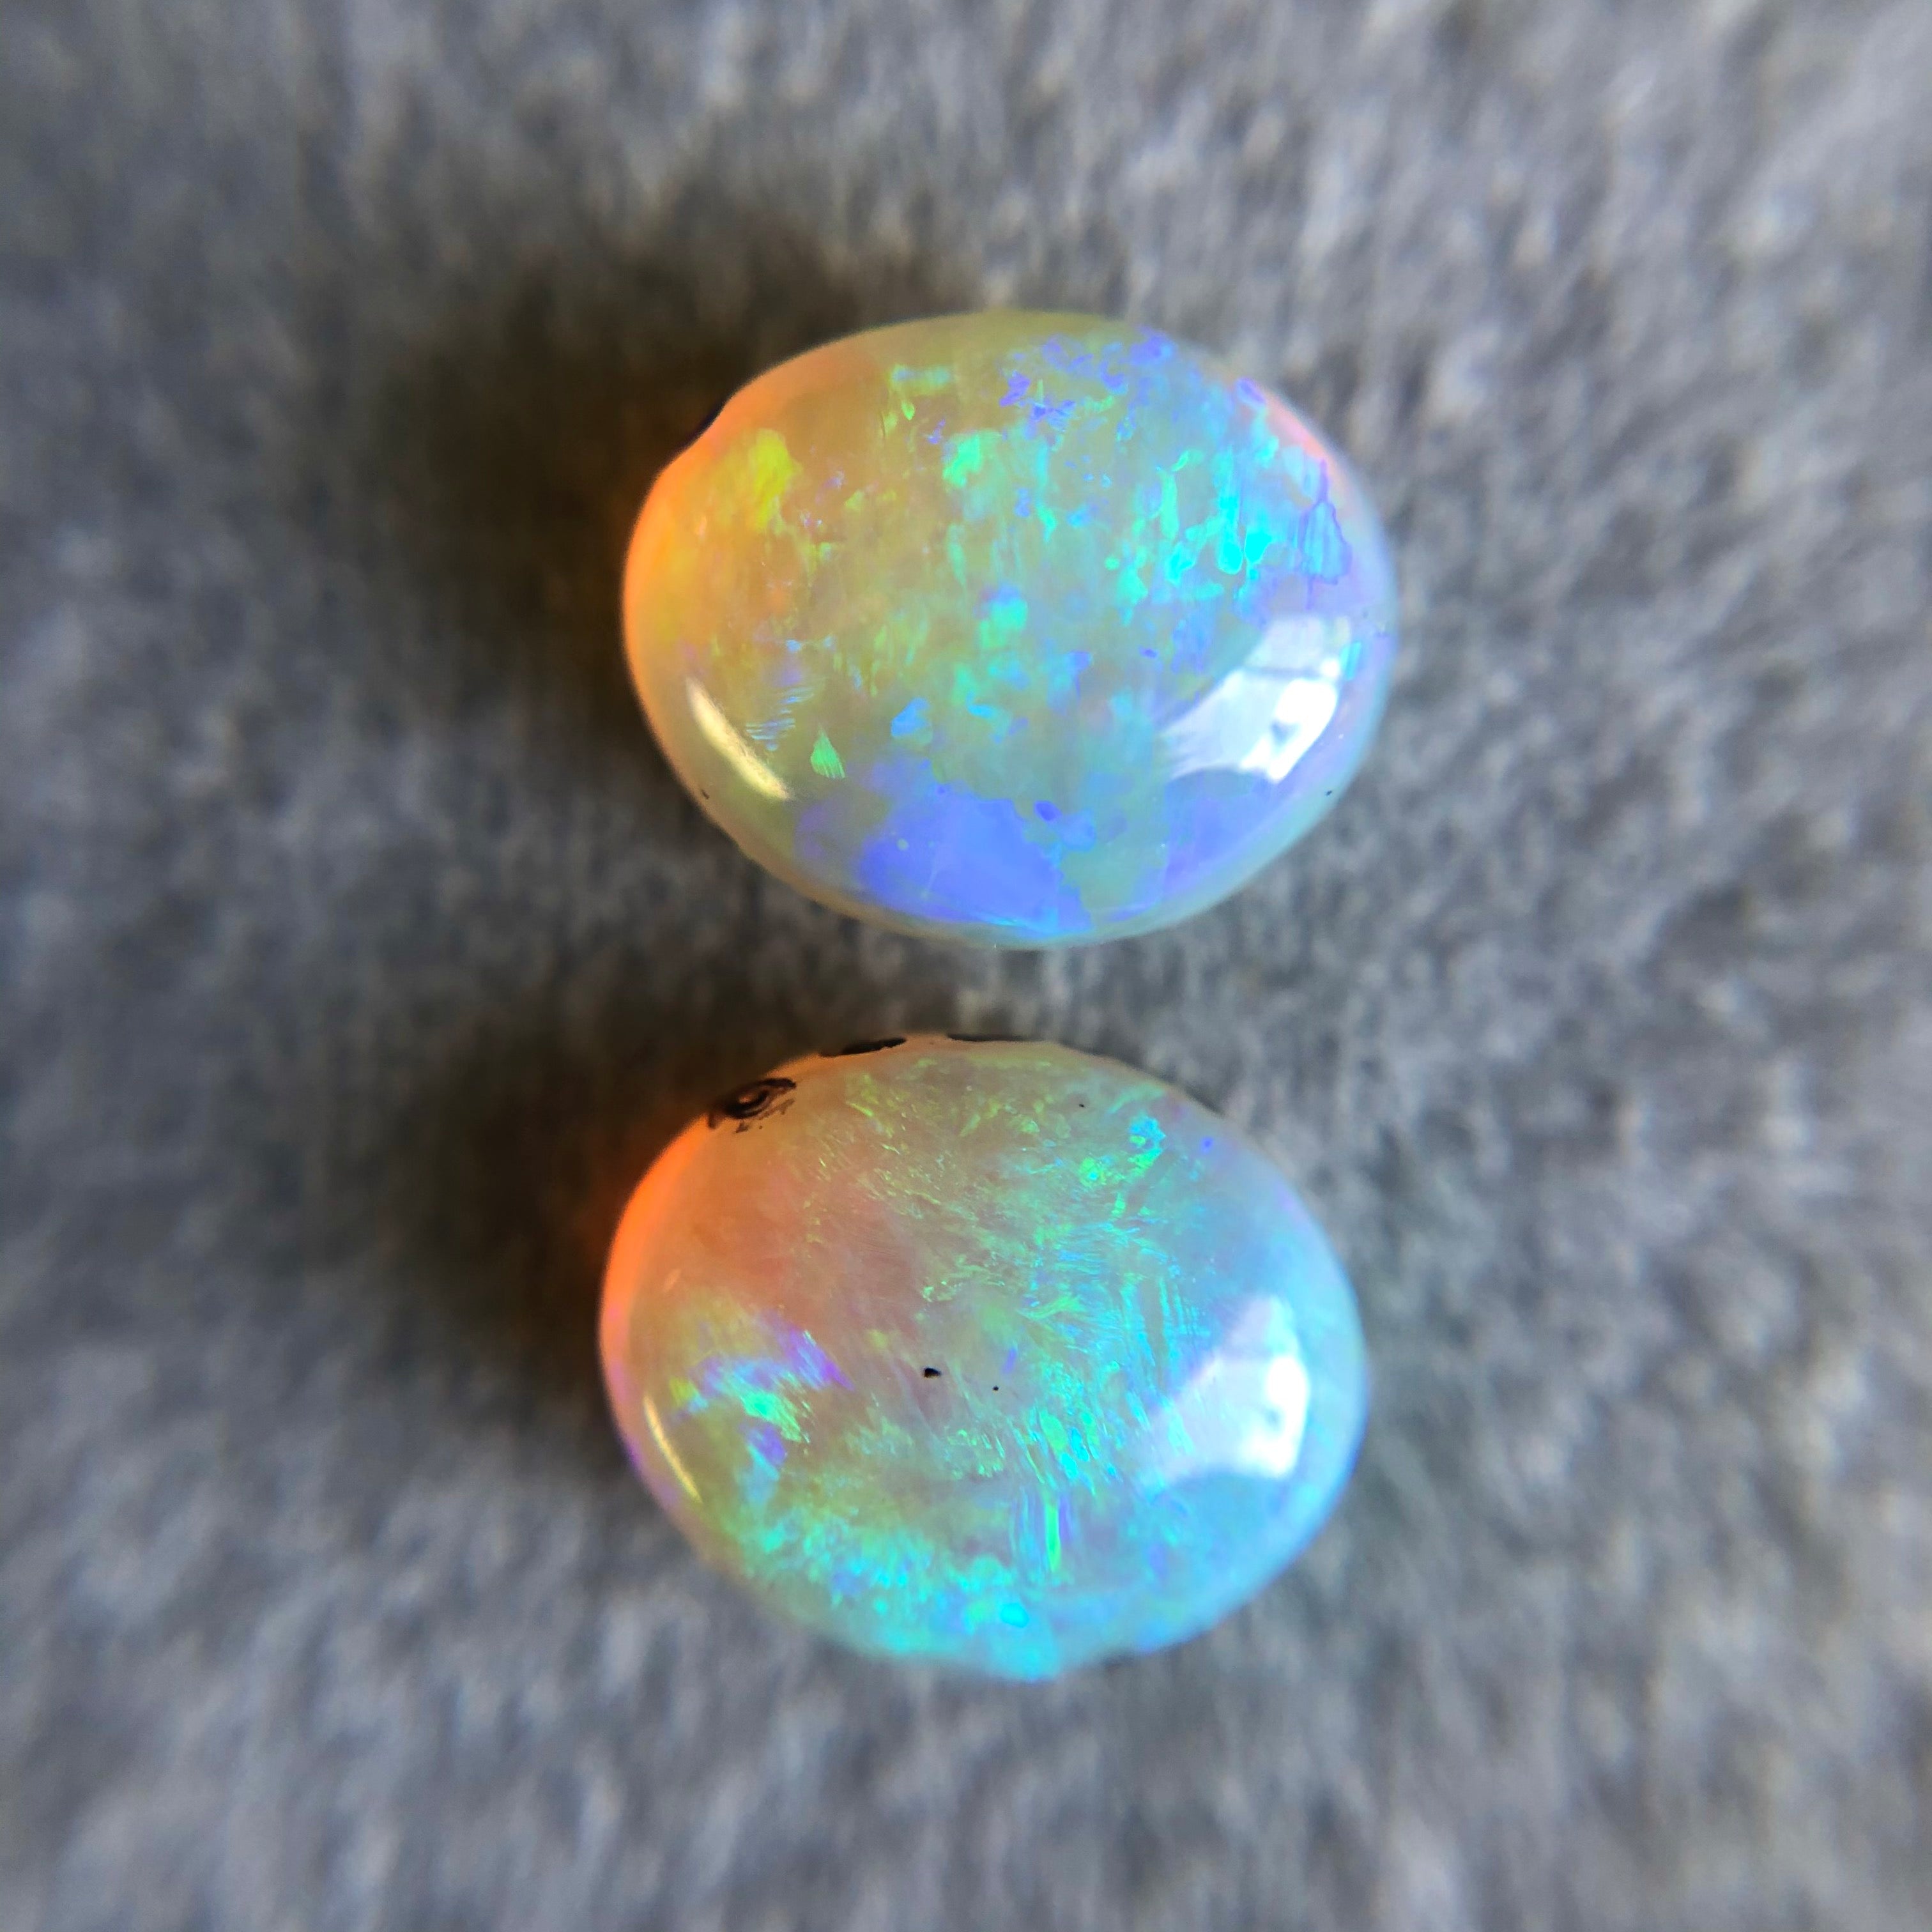 Australian jelly opal matched pair 2.53 carat total loose gemstone - B ...